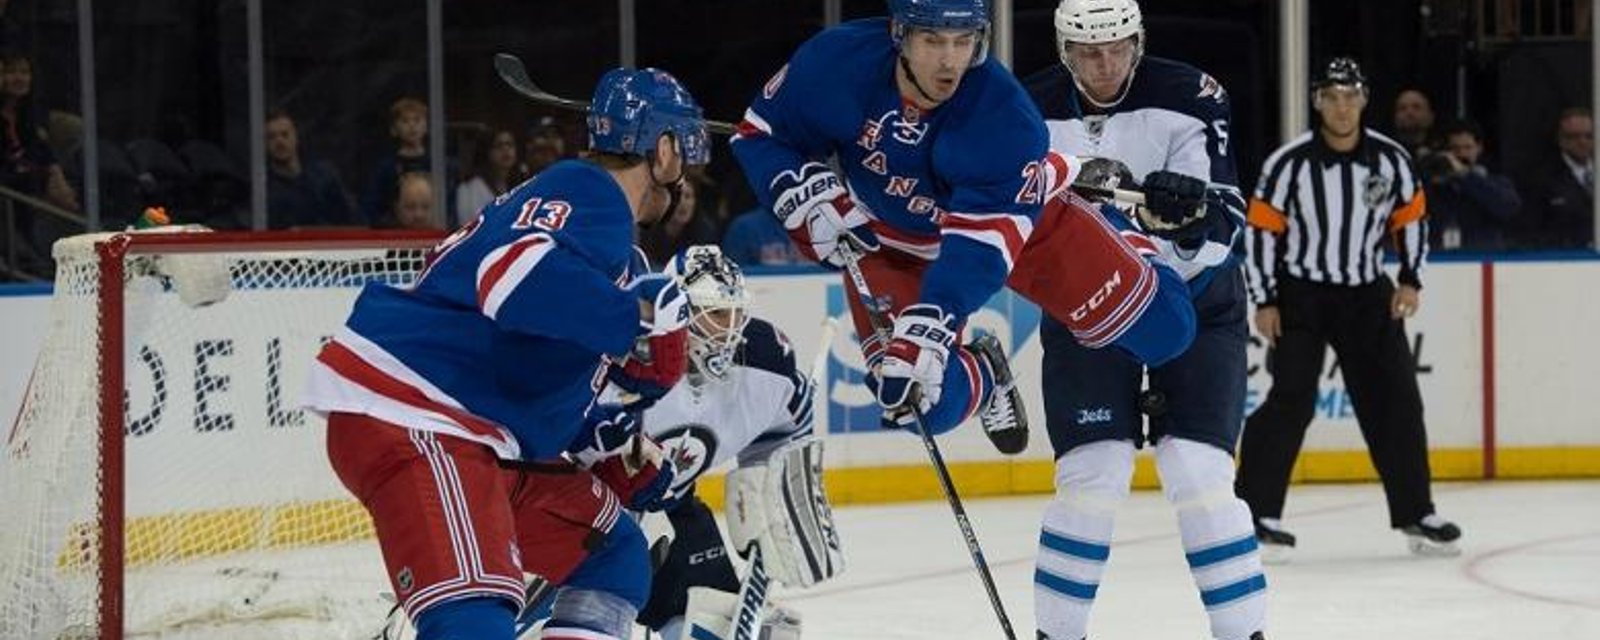 Rangers sign both Kreider and Hayes to new deals on Friday.